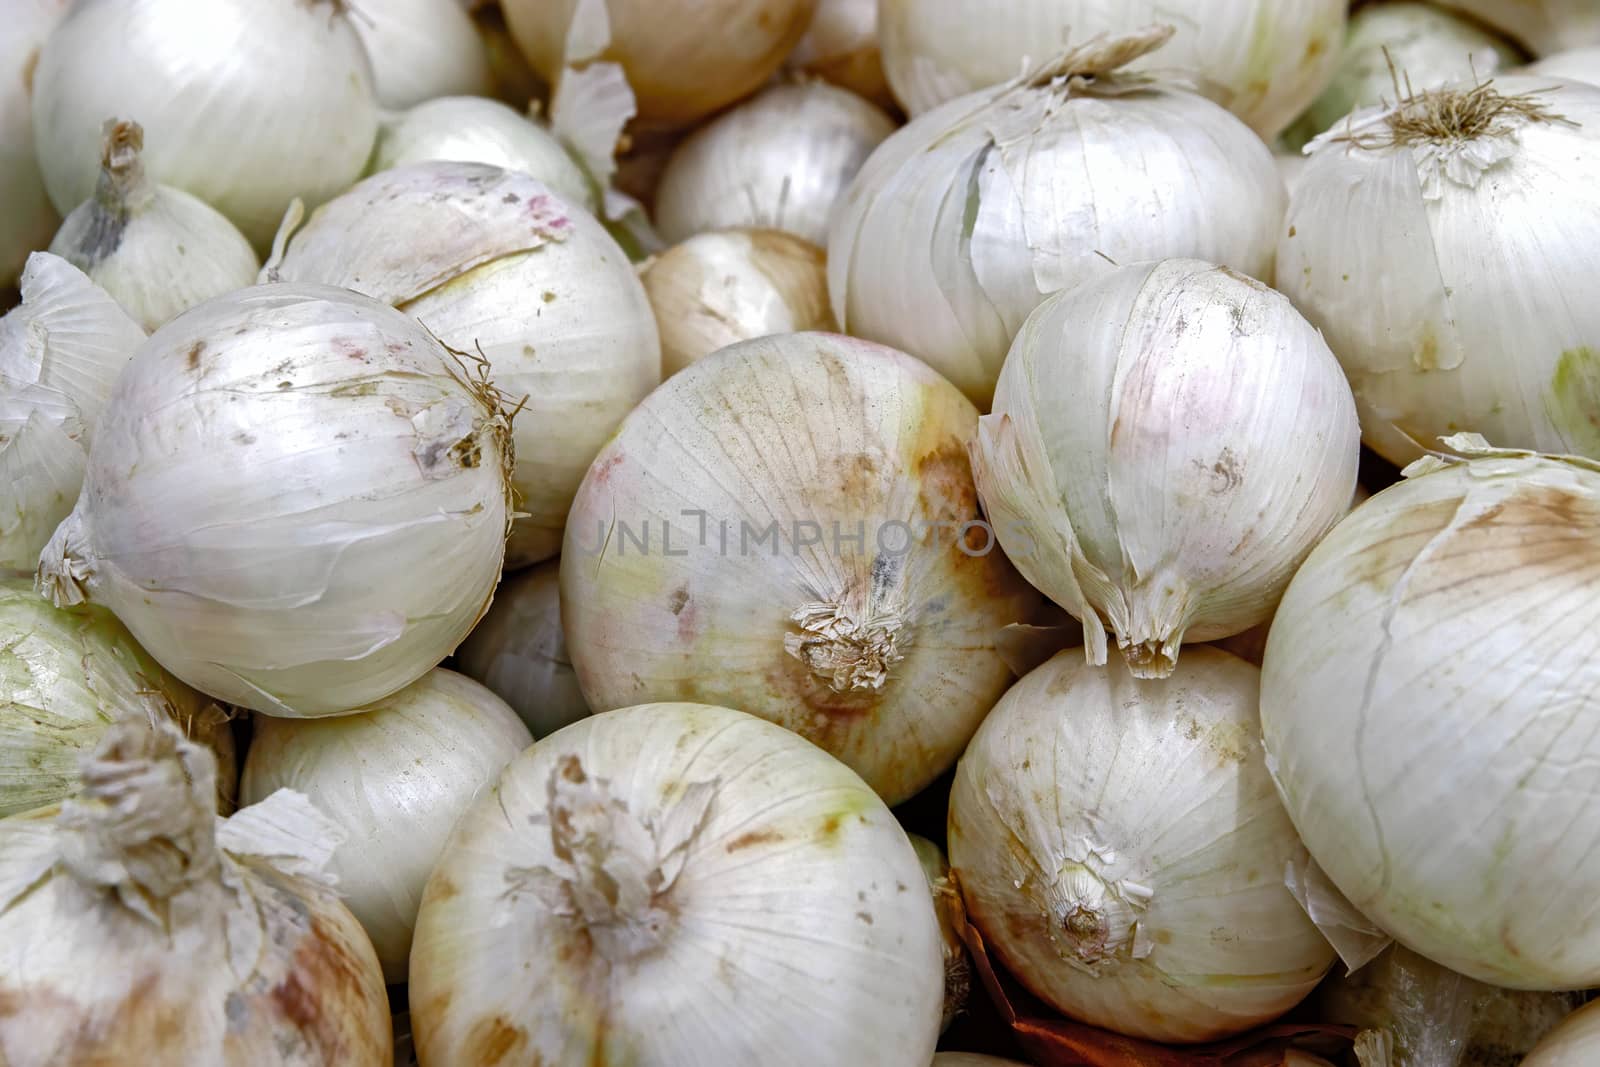 Seasonal vegetables are stacked in boxes at the grocery store. White onions shot close-up. Natural products for cooking healthy food.